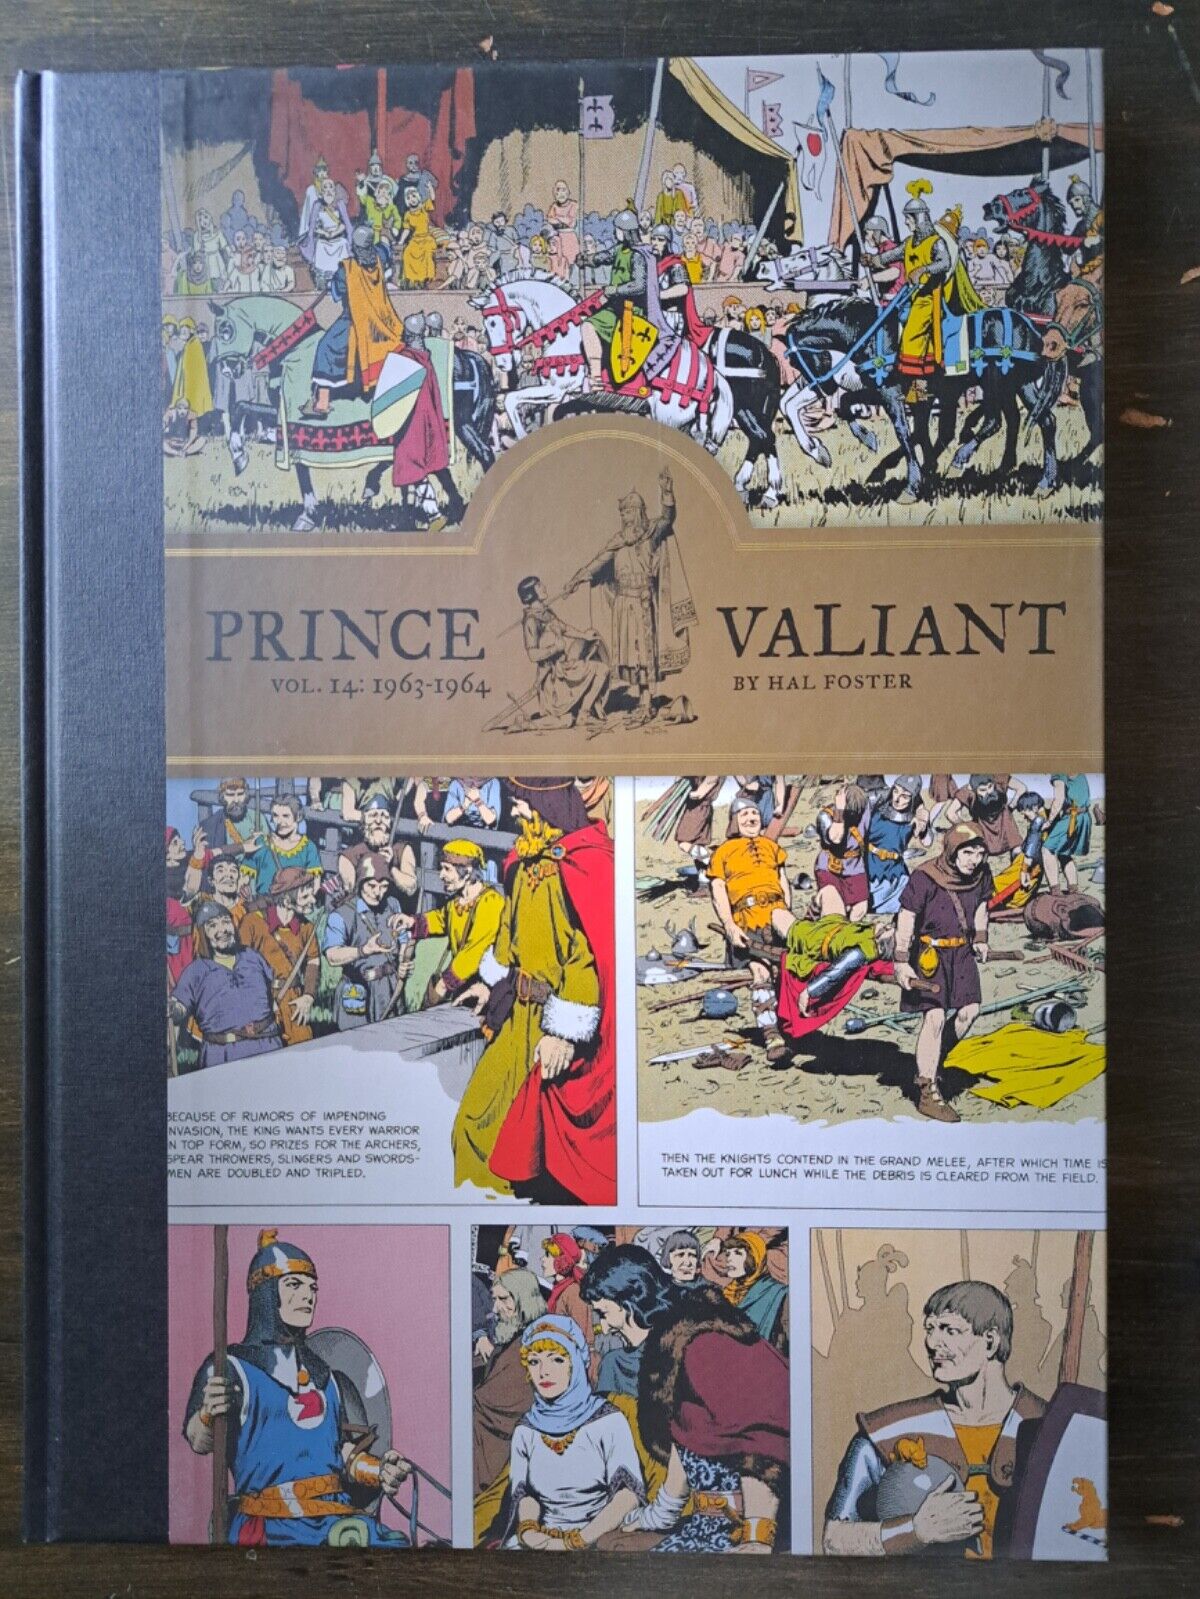 Prince Valiant by Hal Foster Volume 14 (Fantagraphics, Hardcover)